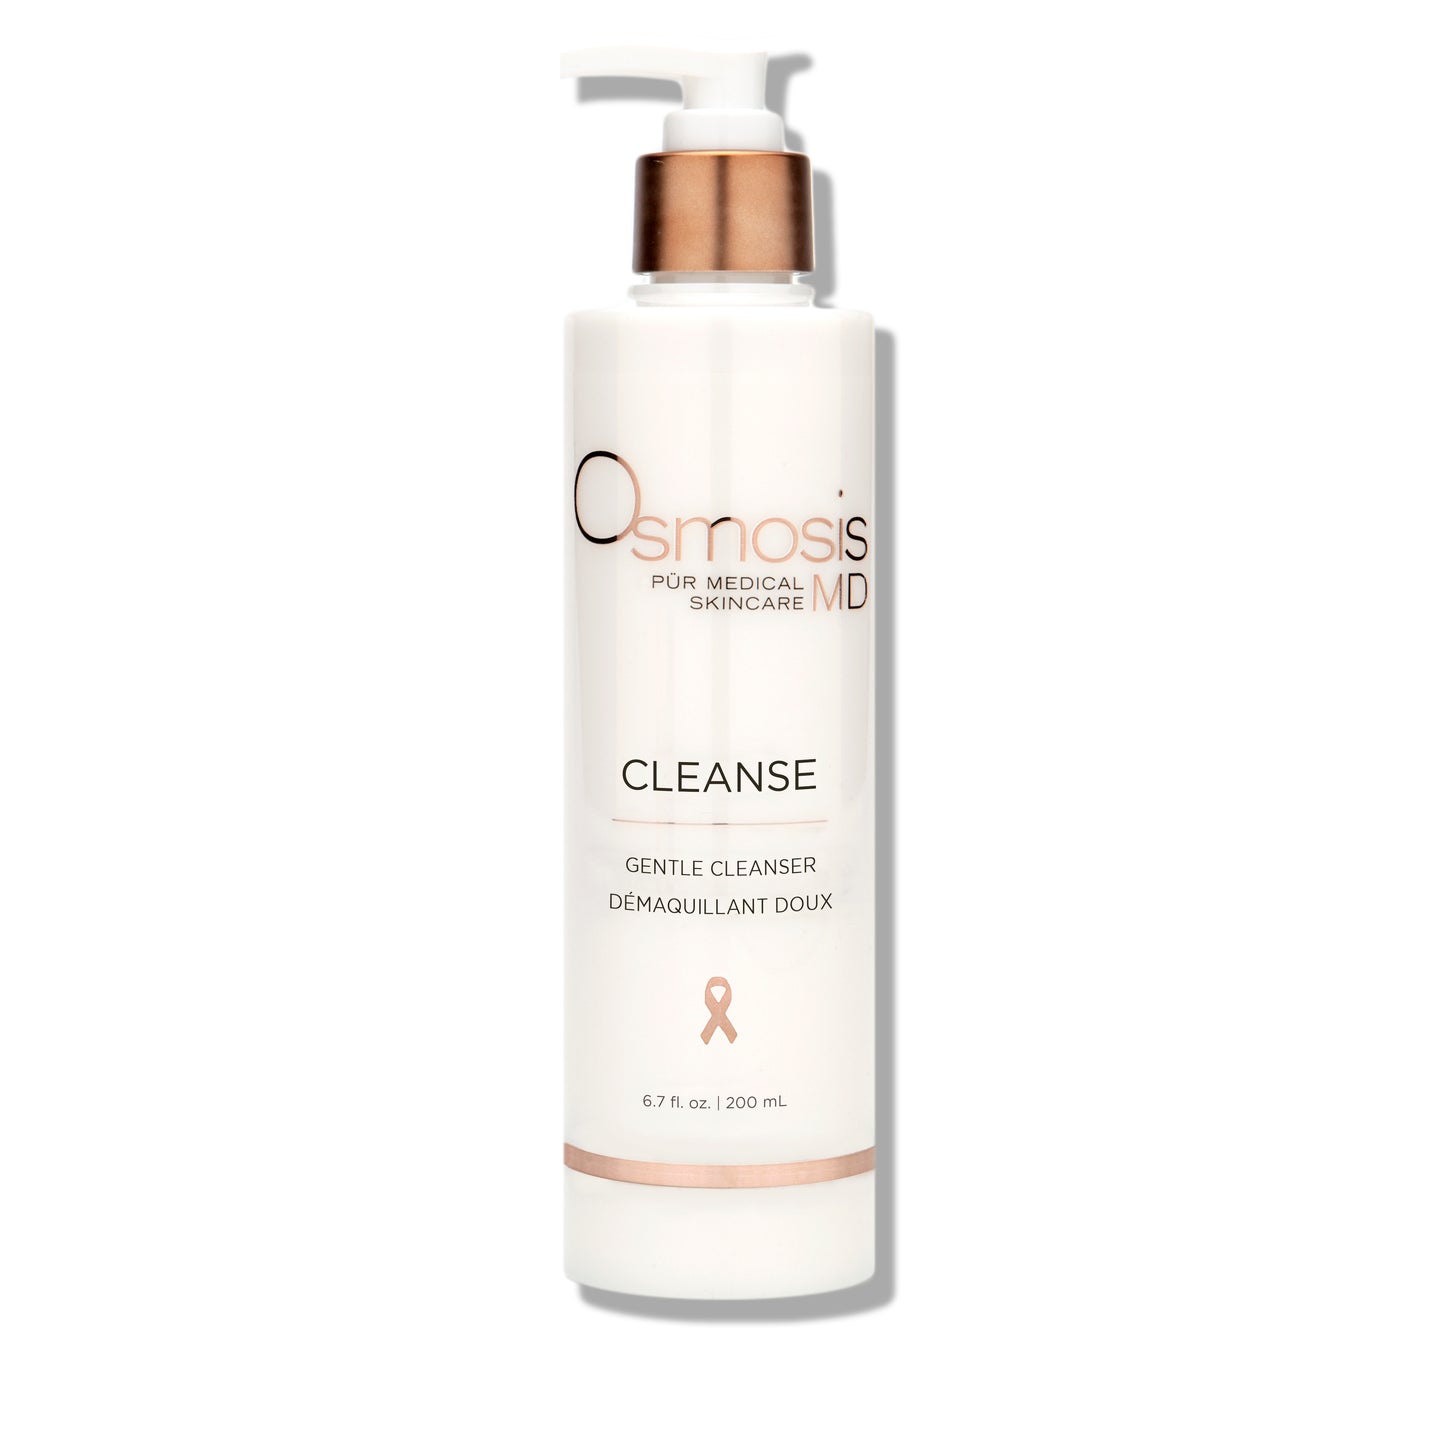 Osmosis cleanse 200ml